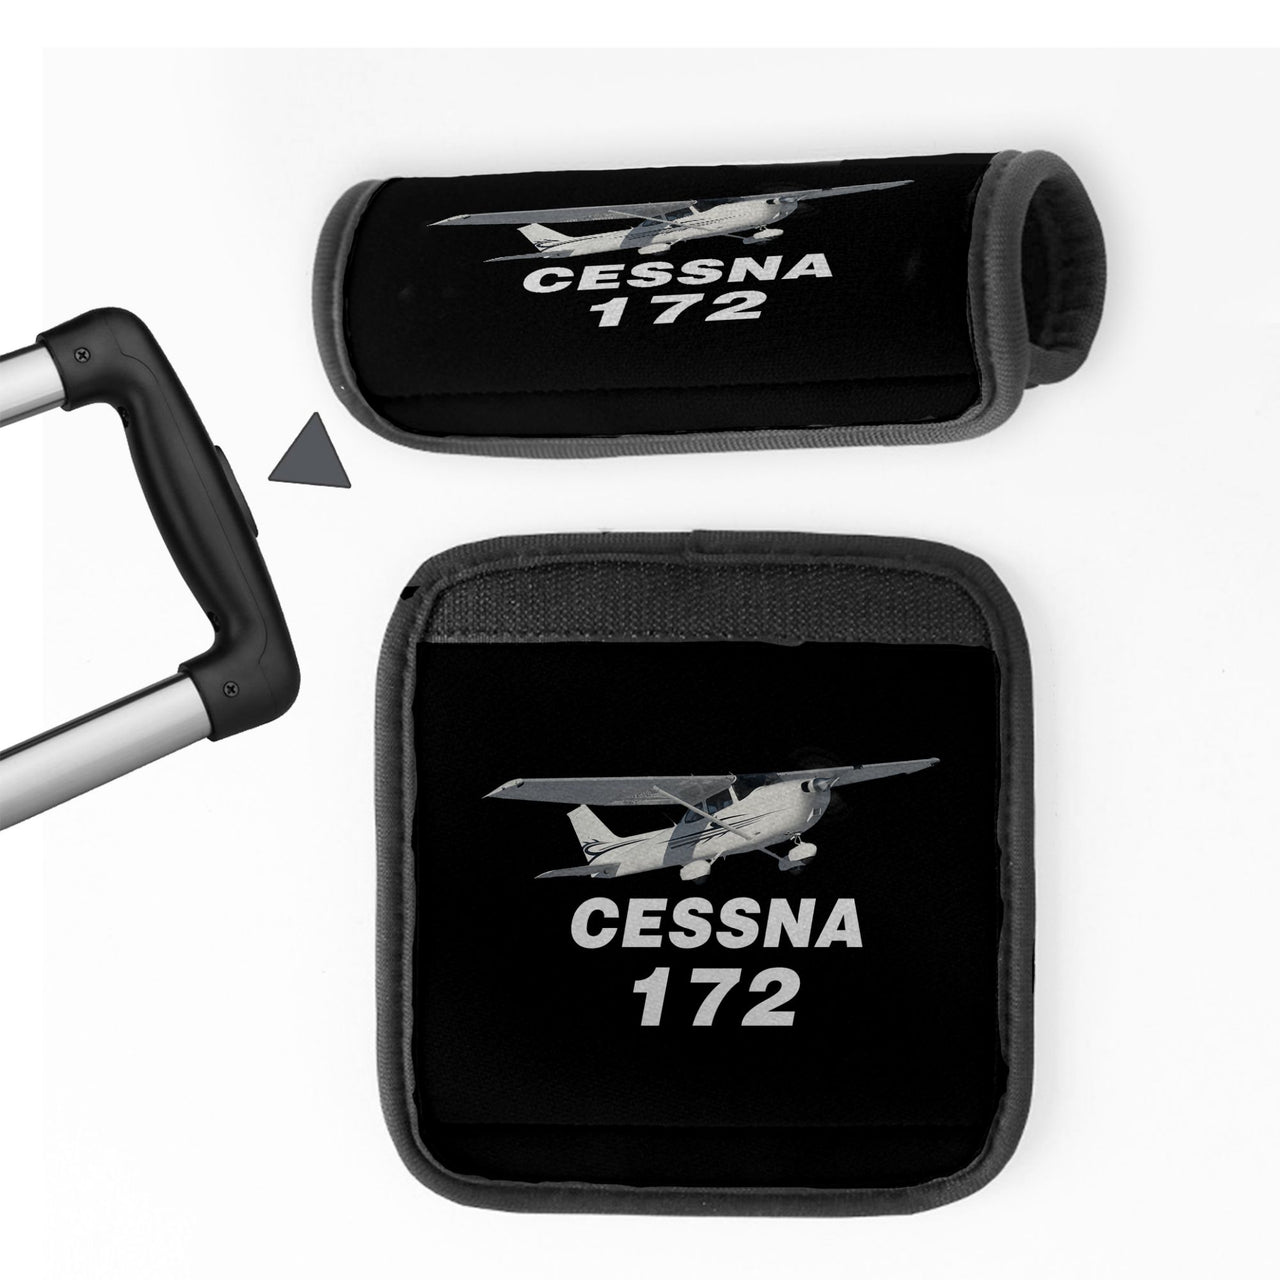 The Cessna 172 Designed Neoprene Luggage Handle Covers